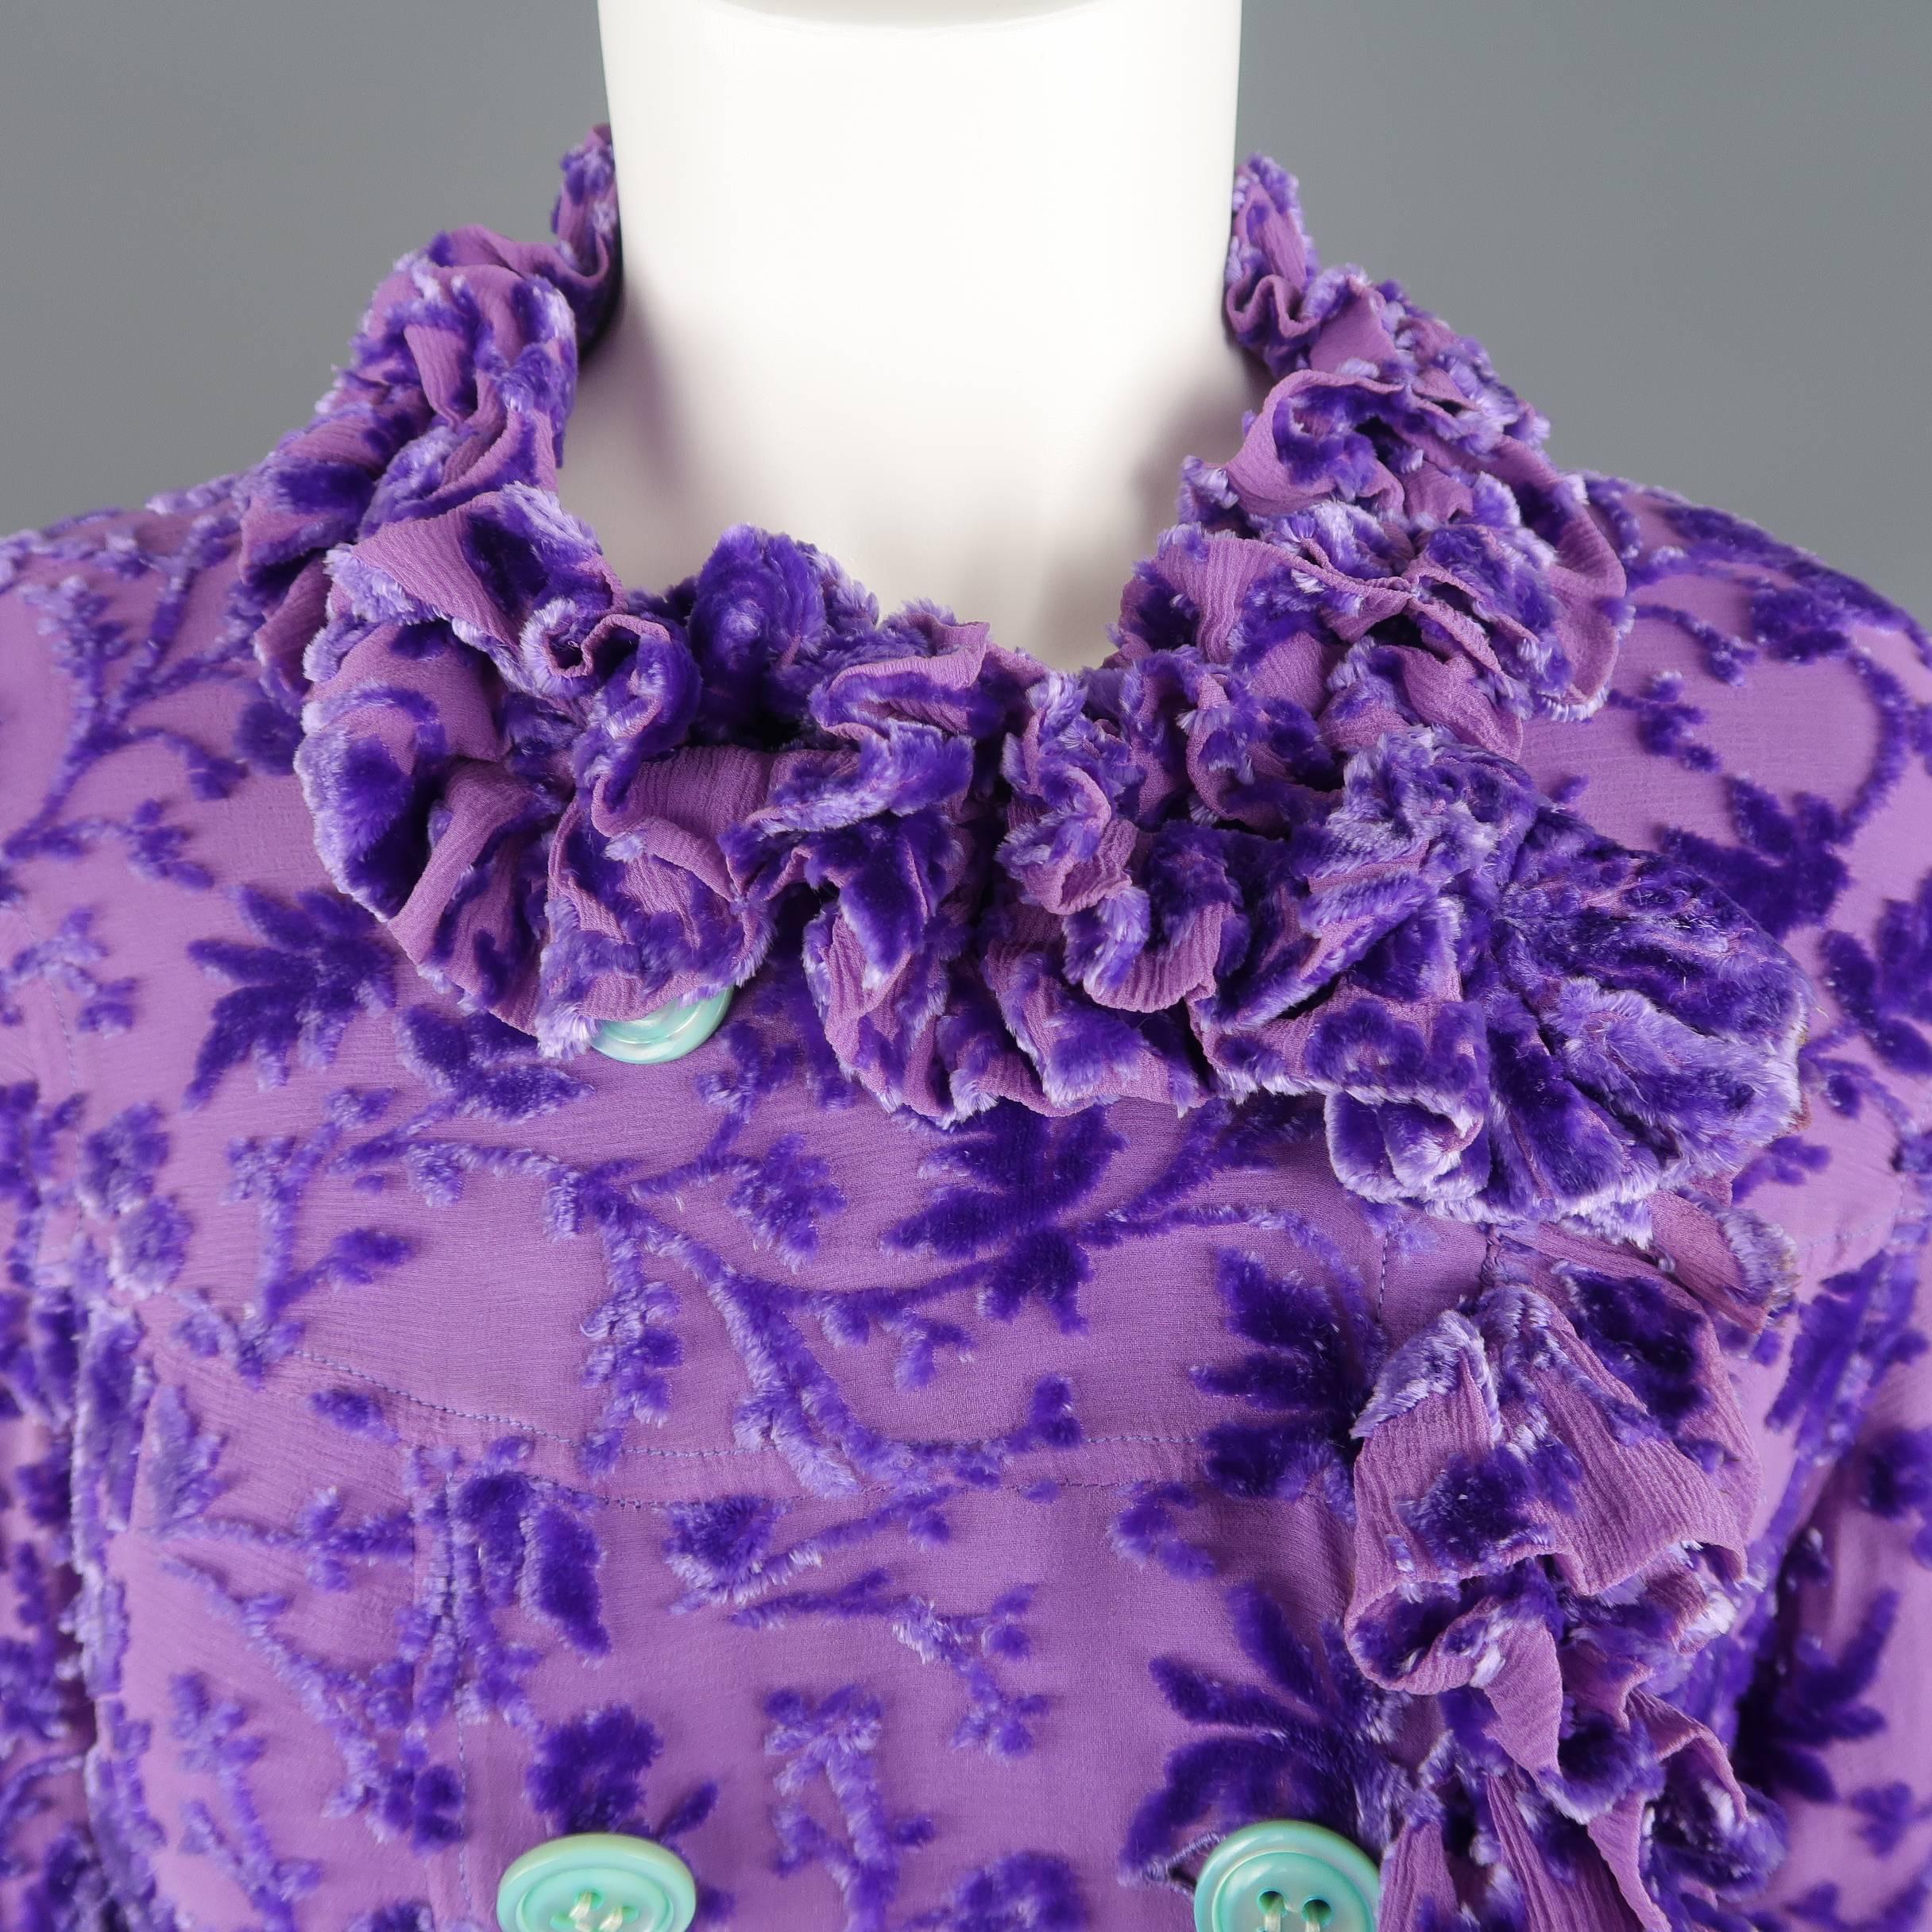 Vintage Voyage jacket comes in purple silk blend Damask print velvet burnout chiffon with a double breasted turquoise button front, patch pockets, silk satin liner, and ruffled collar and trim. Made in England.
 
Excellent Pre-Owned